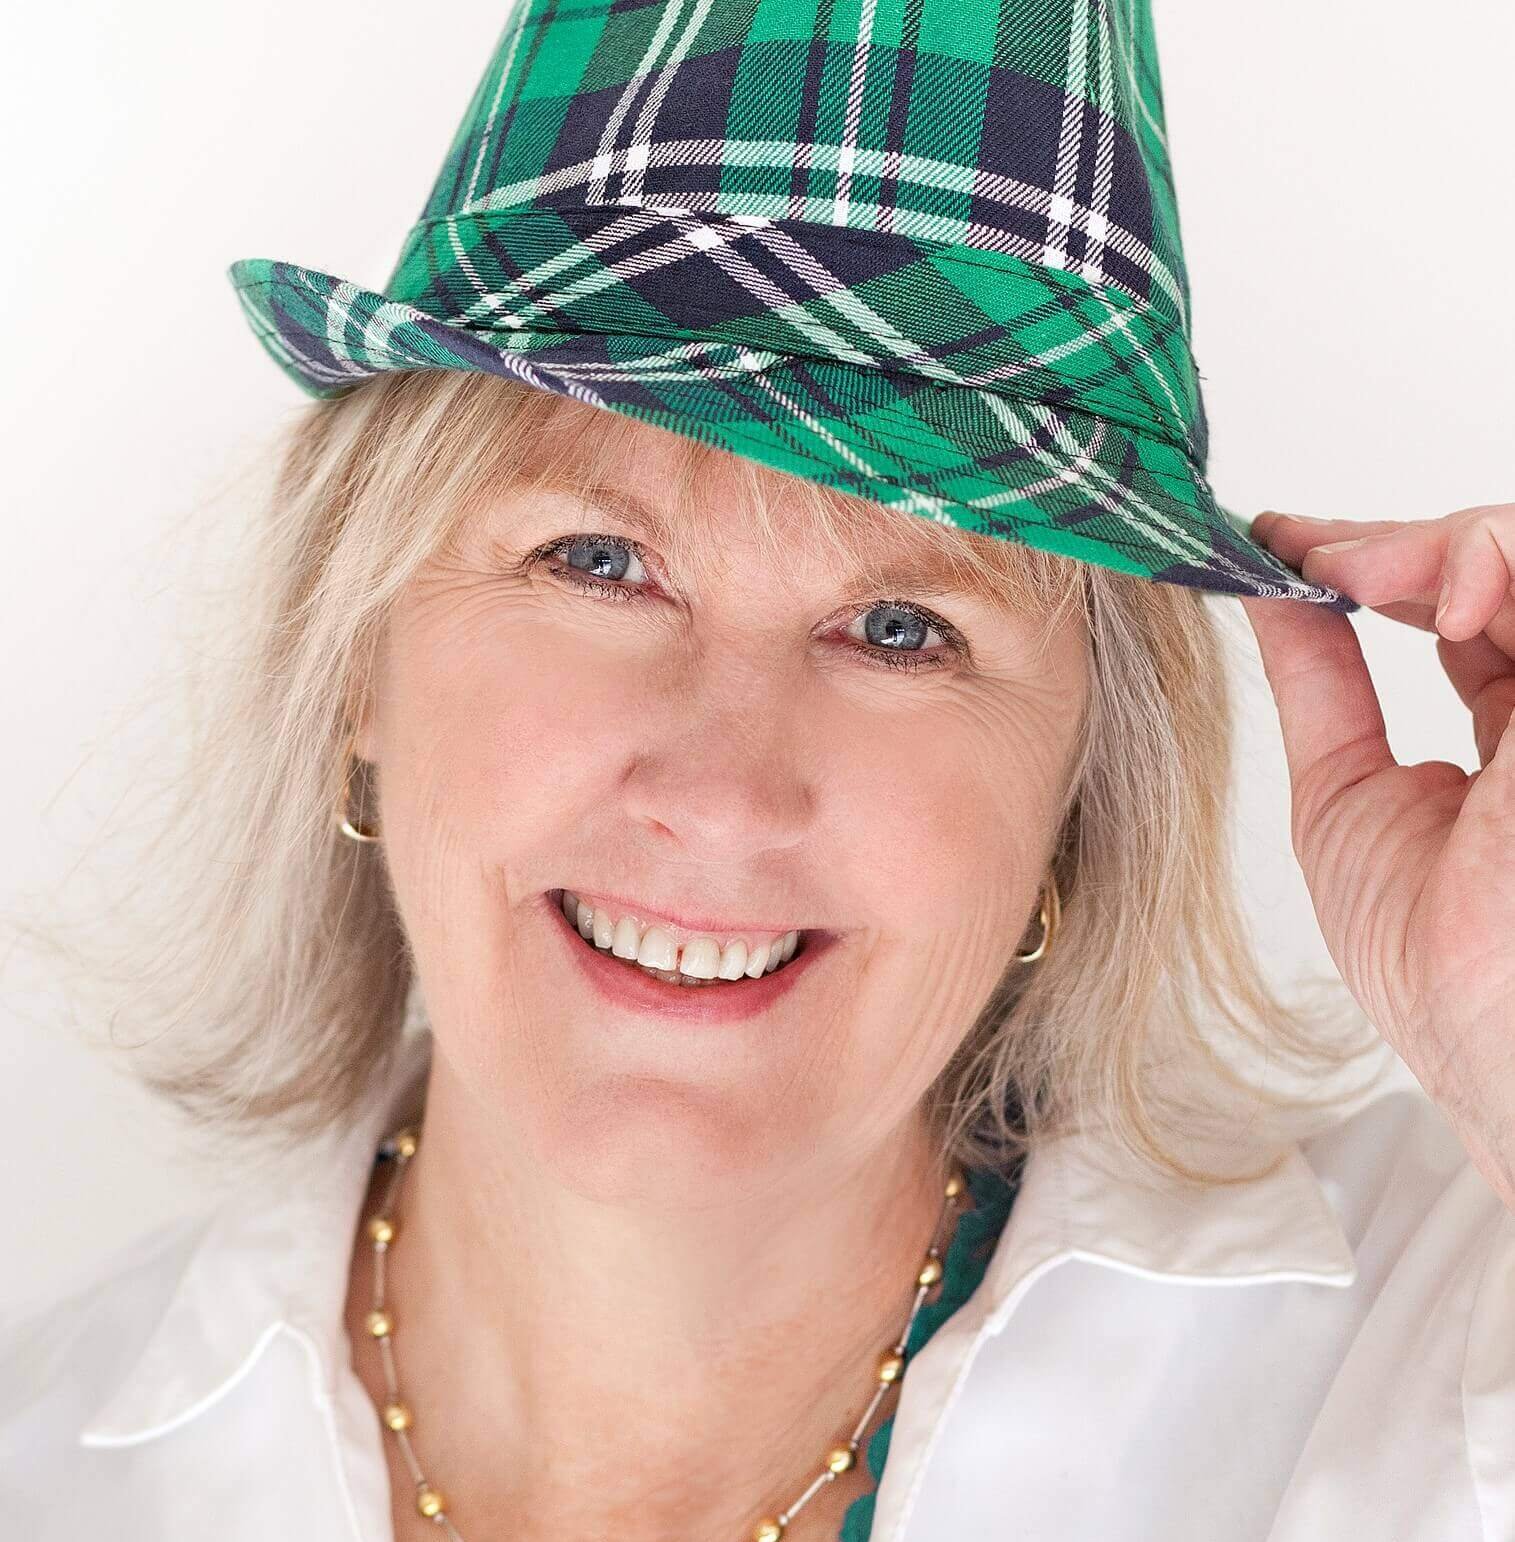 Meet Donna Reed. An interview with Donna Reed, REALTOR® at Keller Williams Southern Arizona. Donna serves as the Chairperson of the Culture Committee on the Keller Williams Southern Arizona Agent Leadership Council (ALC) for 2023. Donna has blonde hair, is wearing a white shirt and a green plaid hat, facing forward and is smiling.